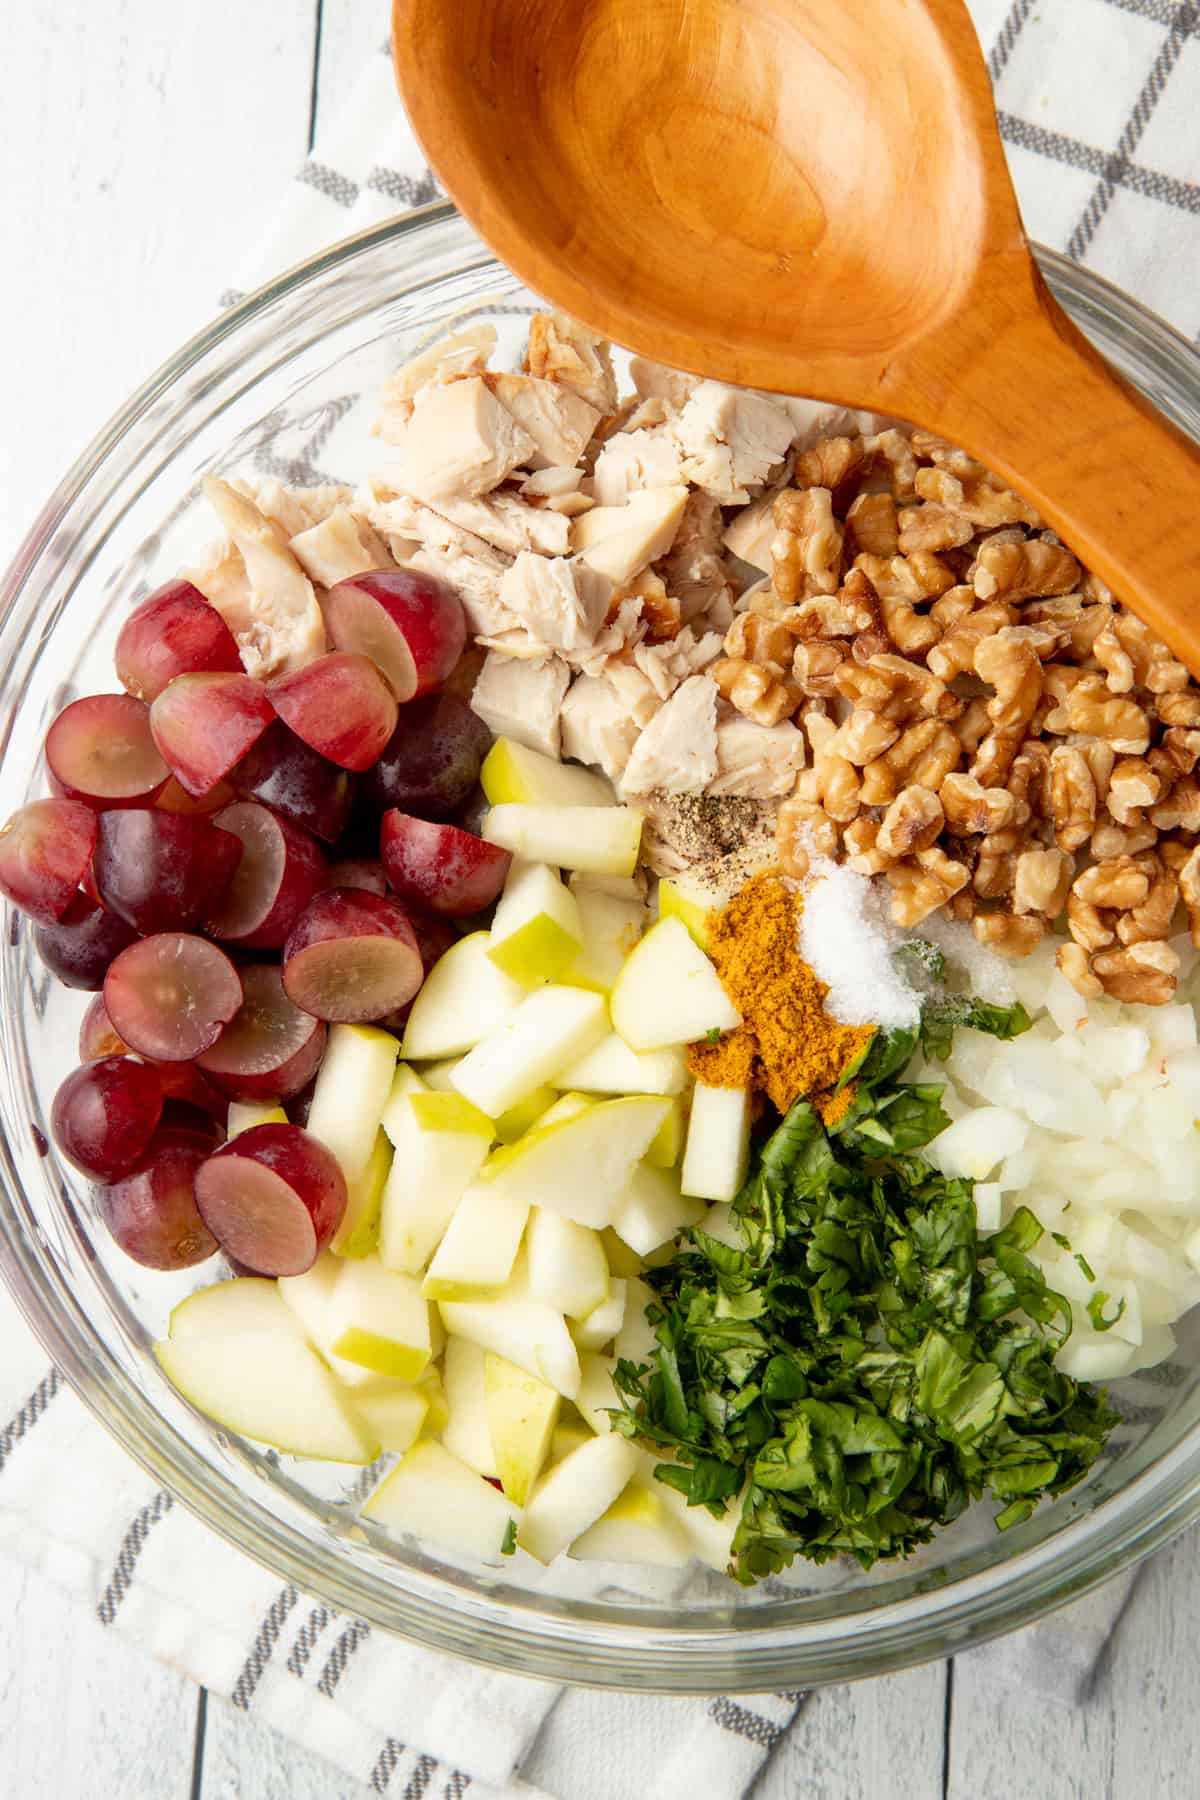 Grapes, chopped chicken, walnuts, onion, and apples are in a glass bowl. A wooden spoon sits on top of the bowl.